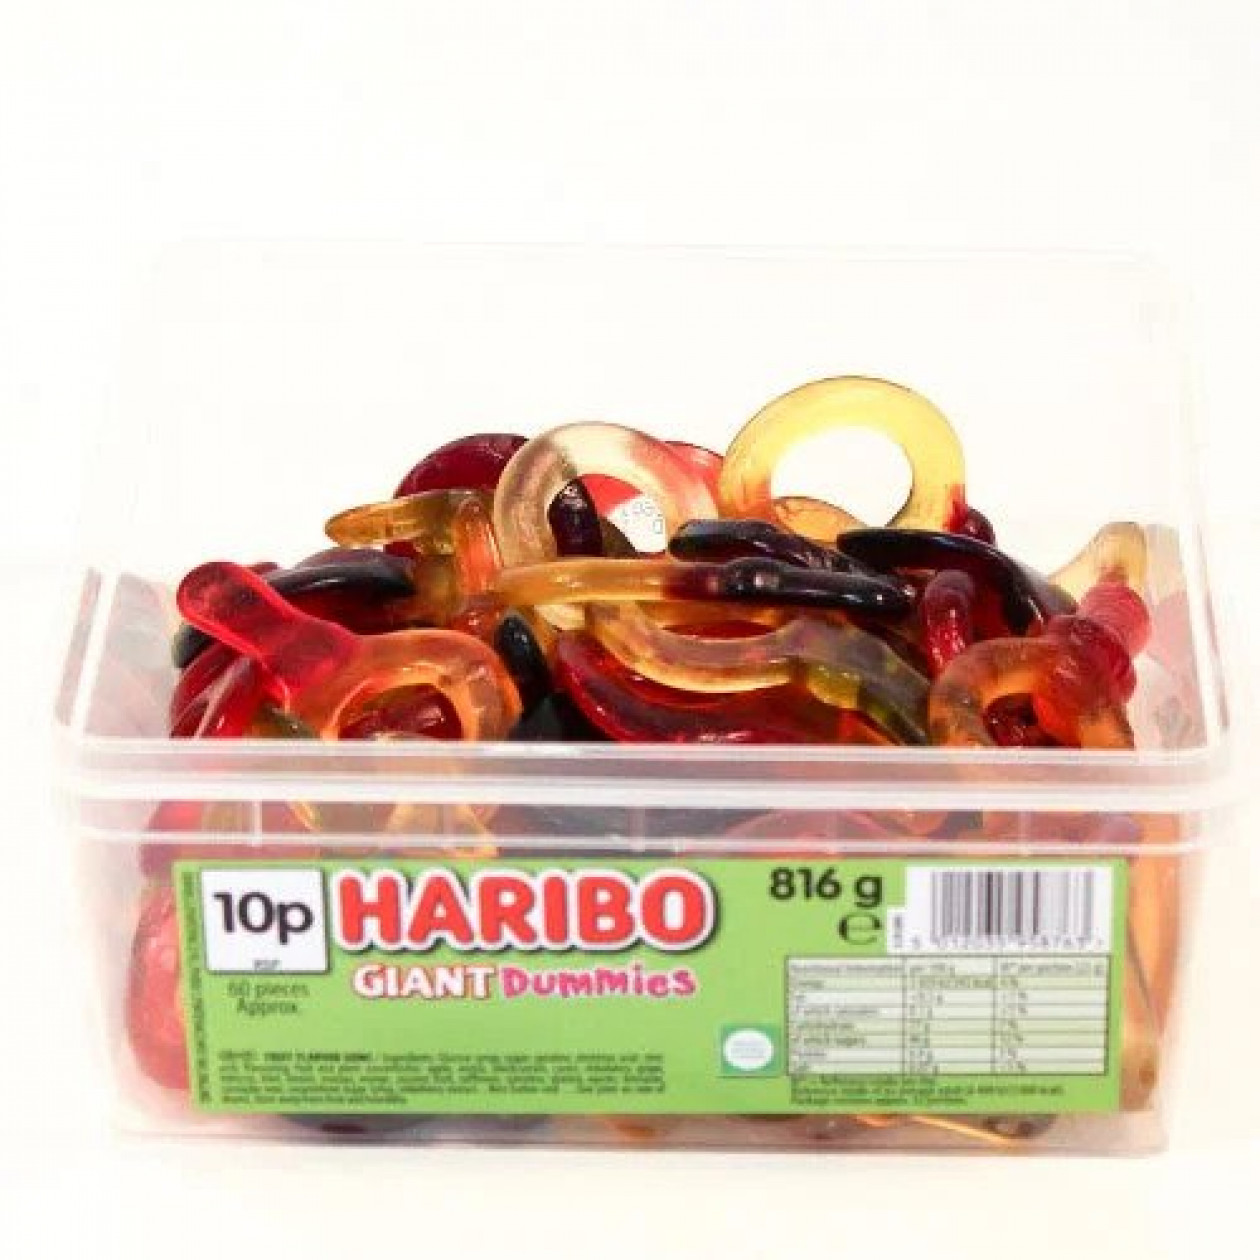 Haribo Giant Dummies Fruit Flavour Jelly Sweets 816g